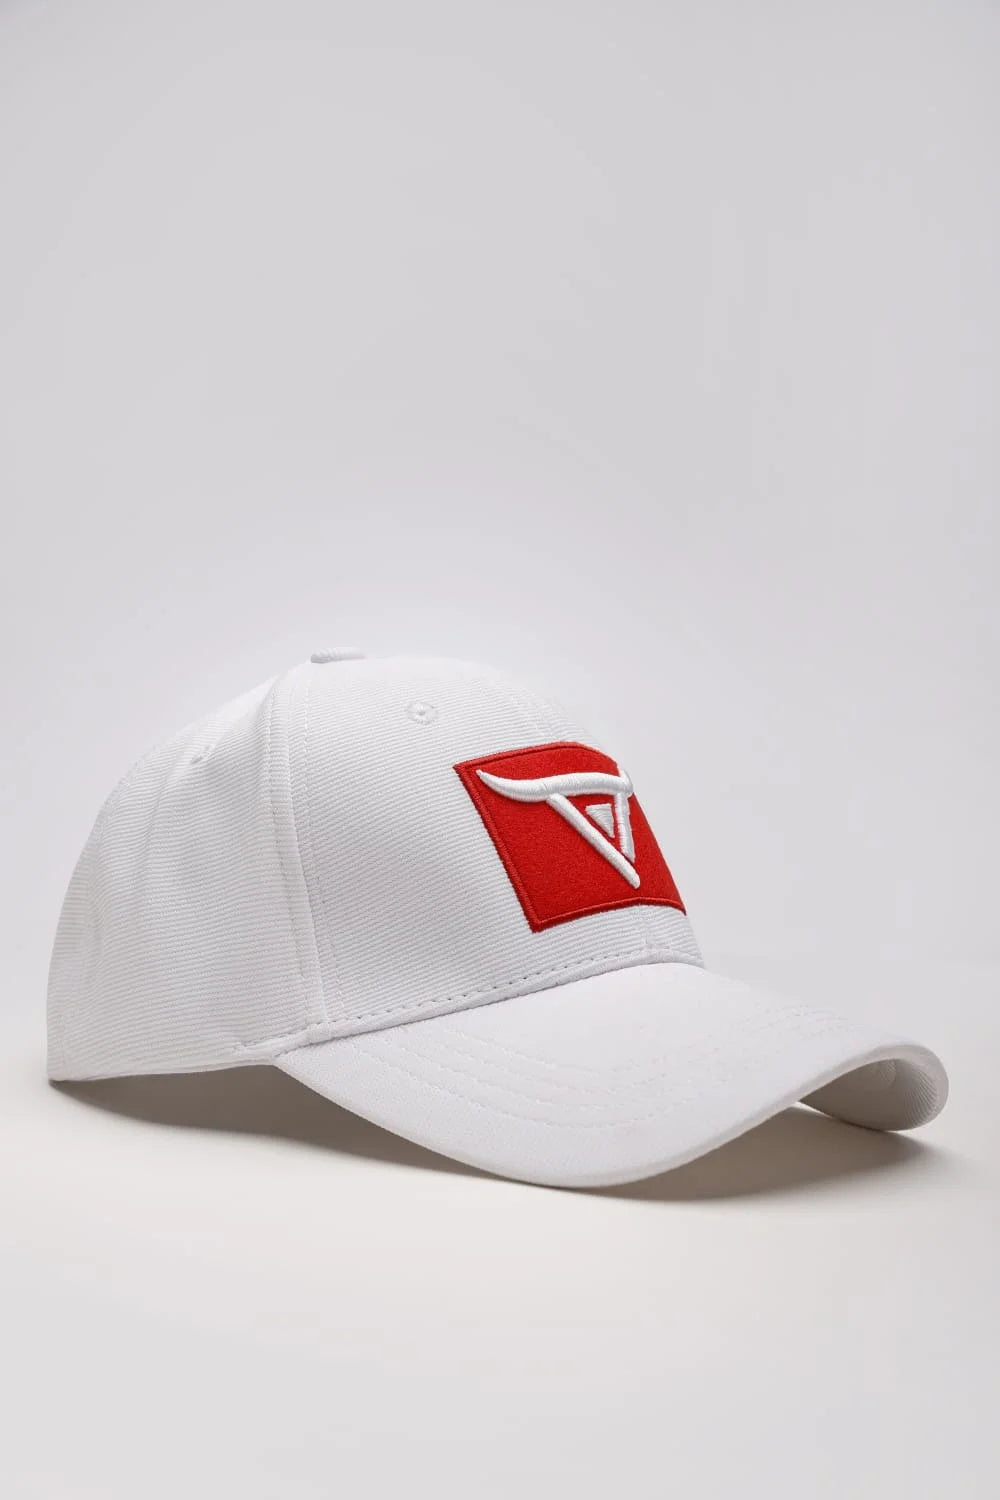 Unisex White& Red solid baseball cap, has a visor by One Player